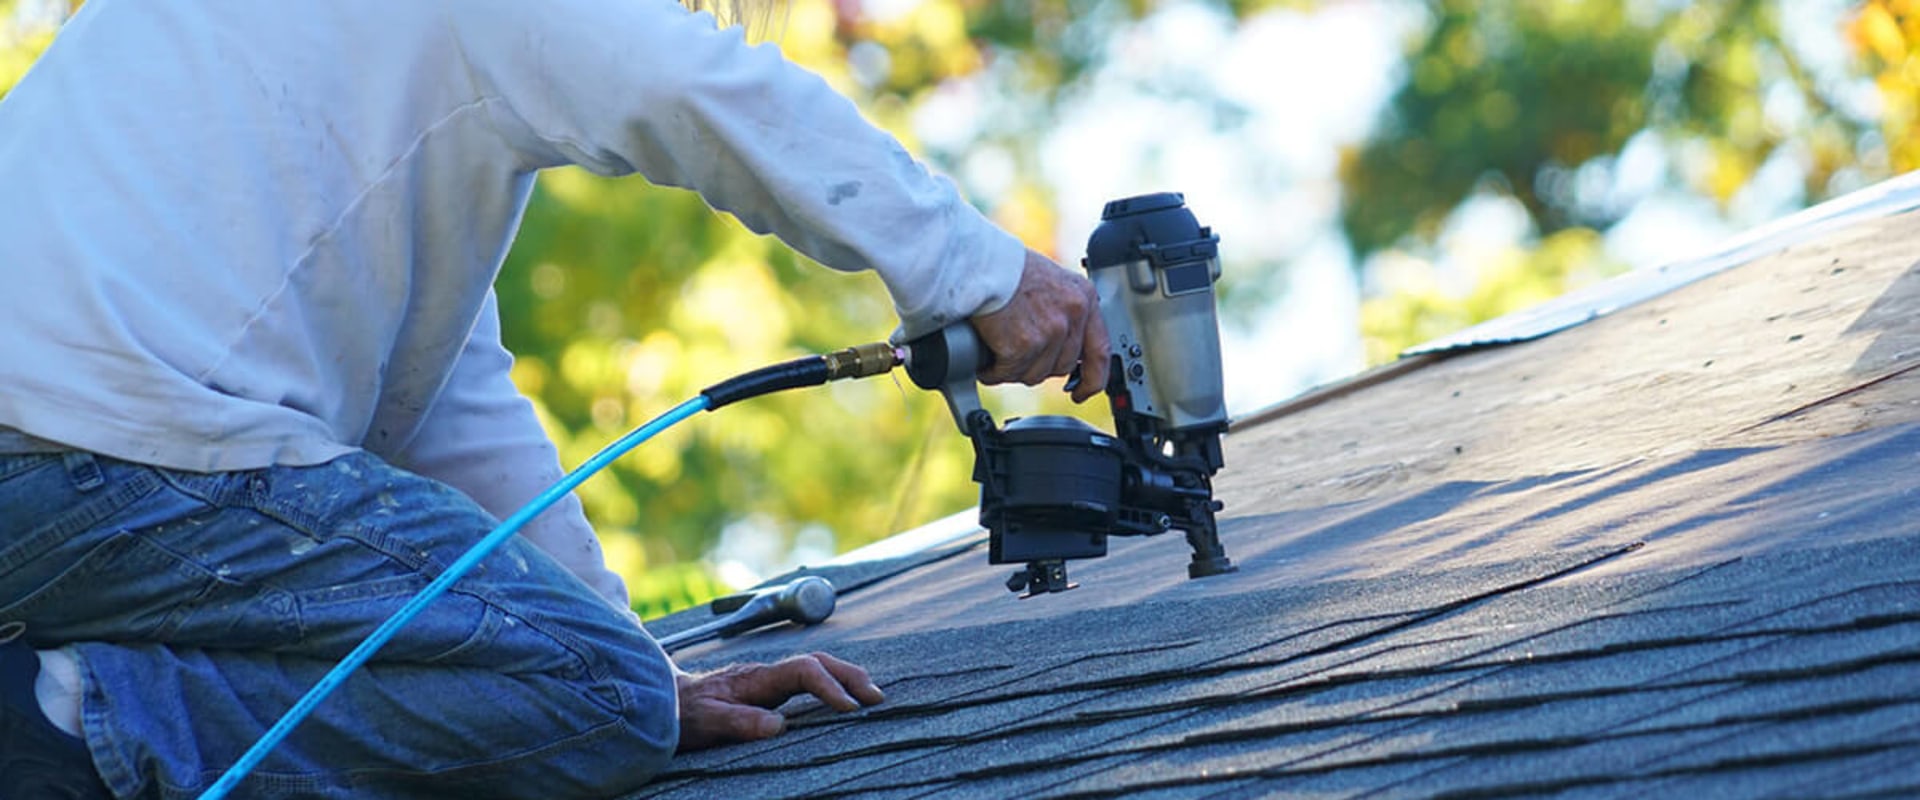 Roofing Repair San Diego: Ensuring the Integrity of Your Home